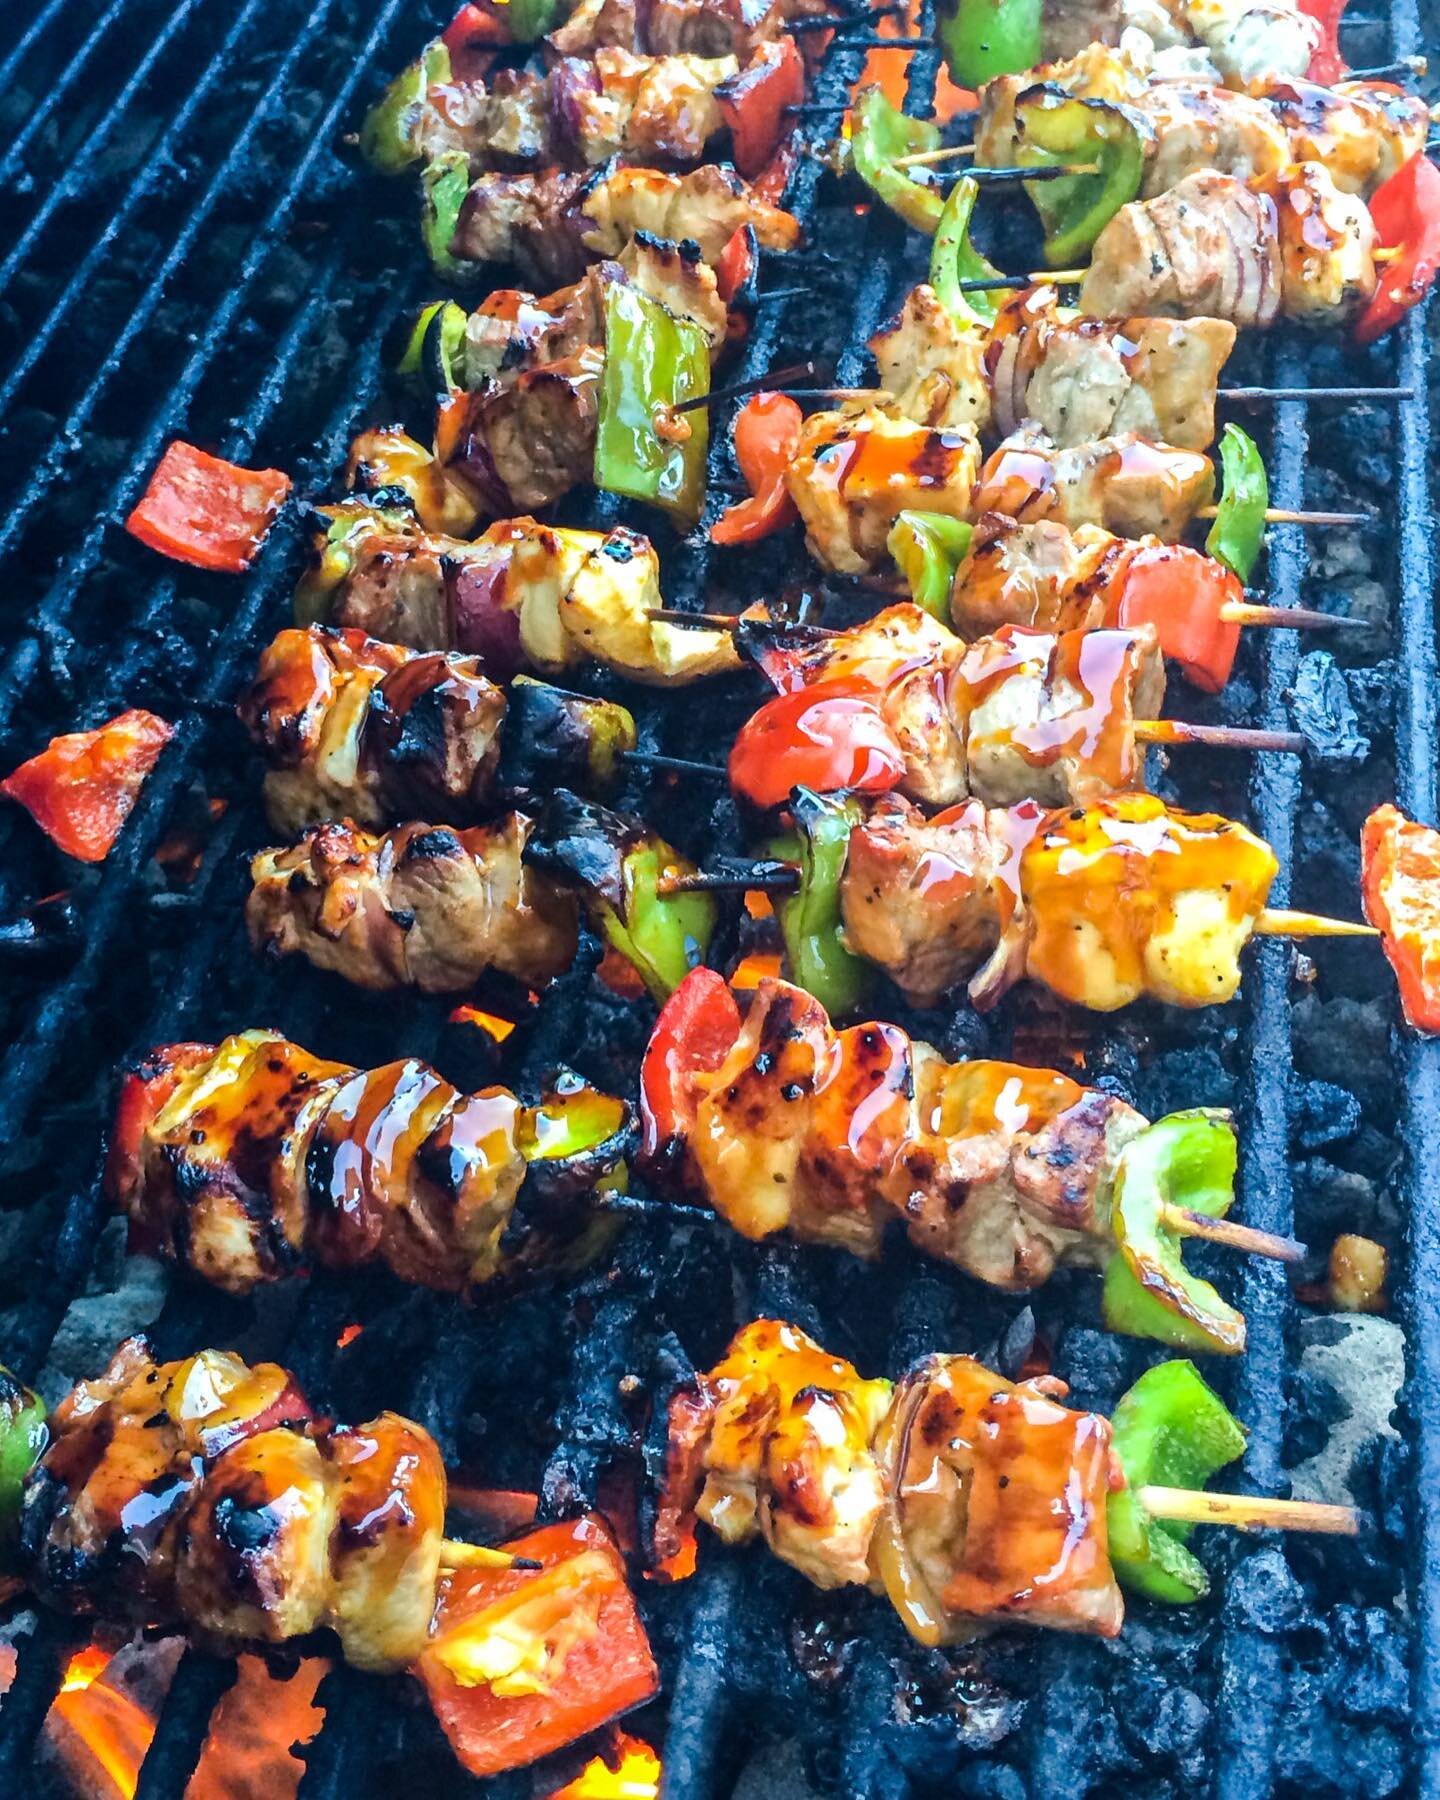 Our spectacular teriyaki skewers are grilled fresh and perfect for any party! 
.
.
.
.
.
.
#partytime #celebrate #catering #eventcatering #wedding #weddingcatering #weddingcaterer #kcwedding #kcweddings #kansascity #kansascitycaterer #kccatering #kce